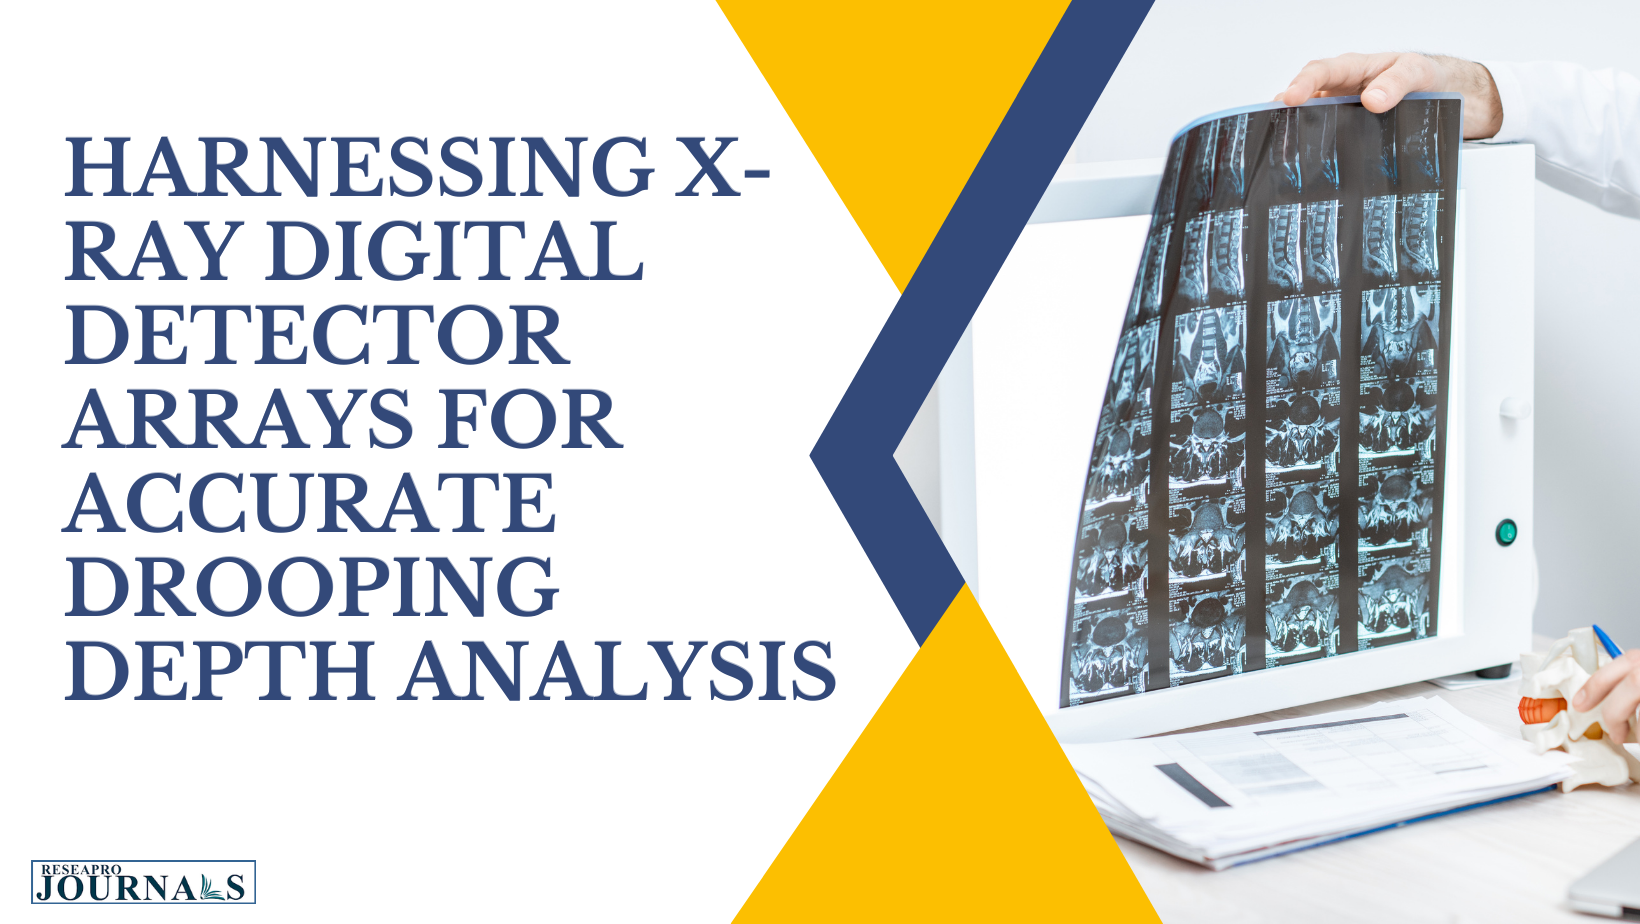 Harnessing X-Ray Digital Detector Arrays for Accurate Drooping Depth Analysis